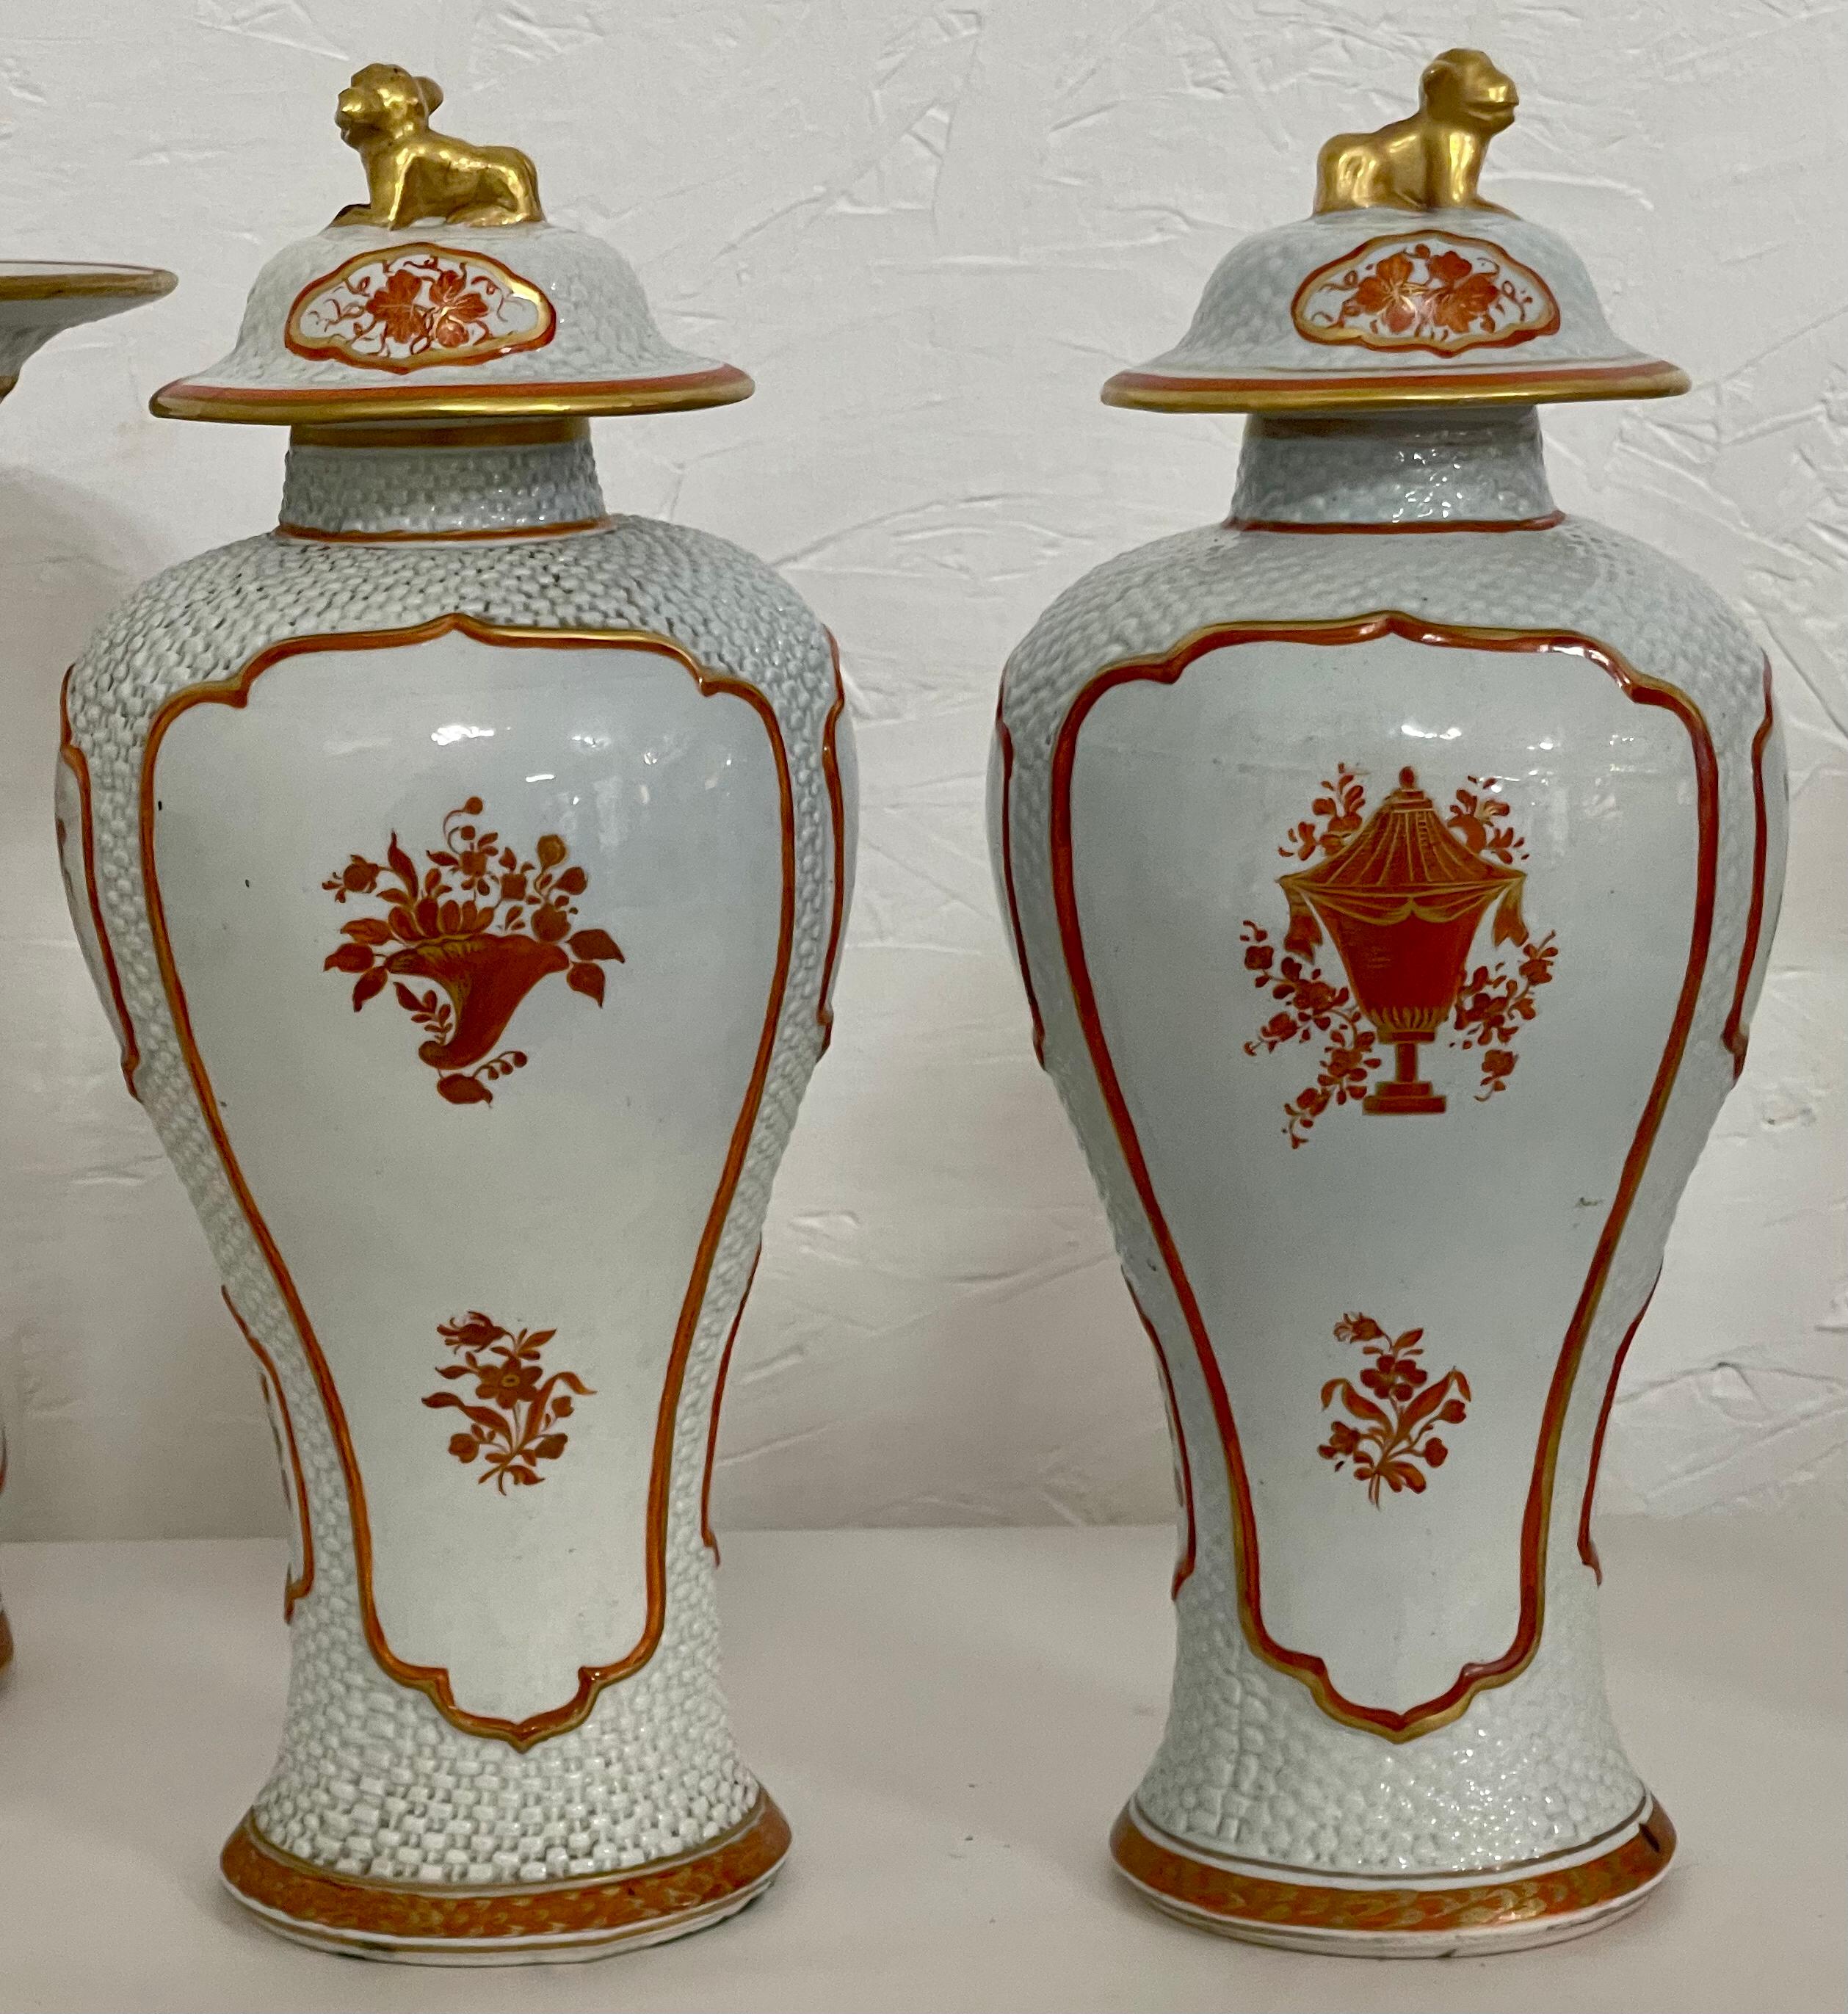 Pottery Armorial Garniture Set with Vases and Foo Dog Ginger Jars by Mottahedeh, S/5